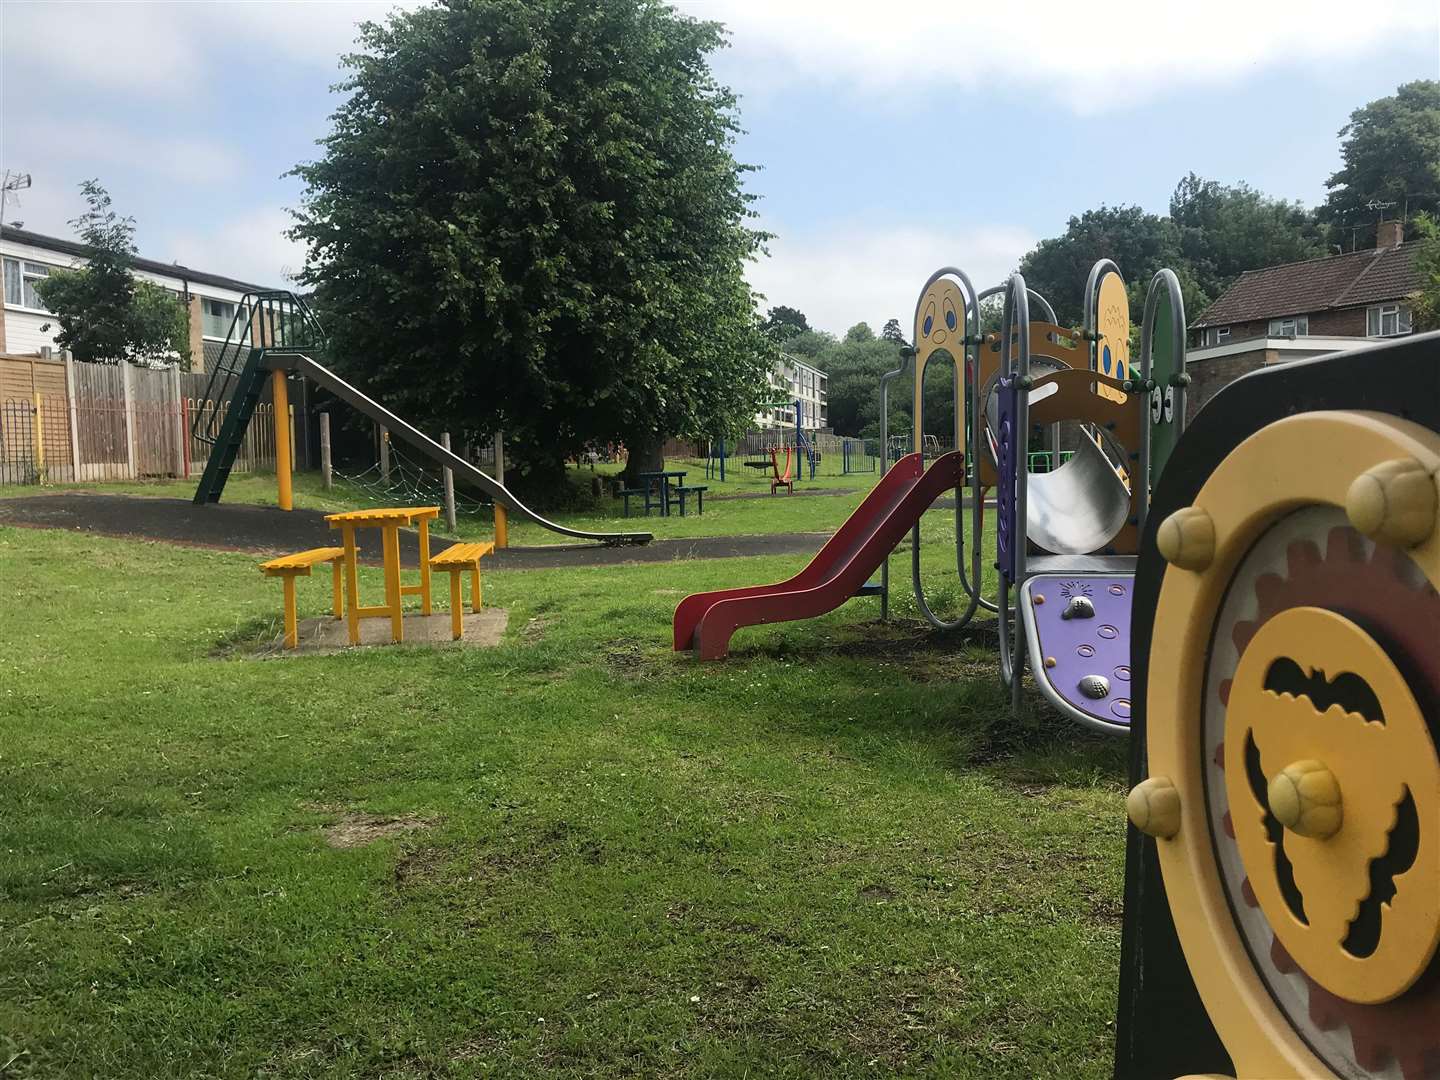 Ms Delgado is calling for action to prevent Suffolk Road play area becoming an anti-social behaviour hotspot (13116115)